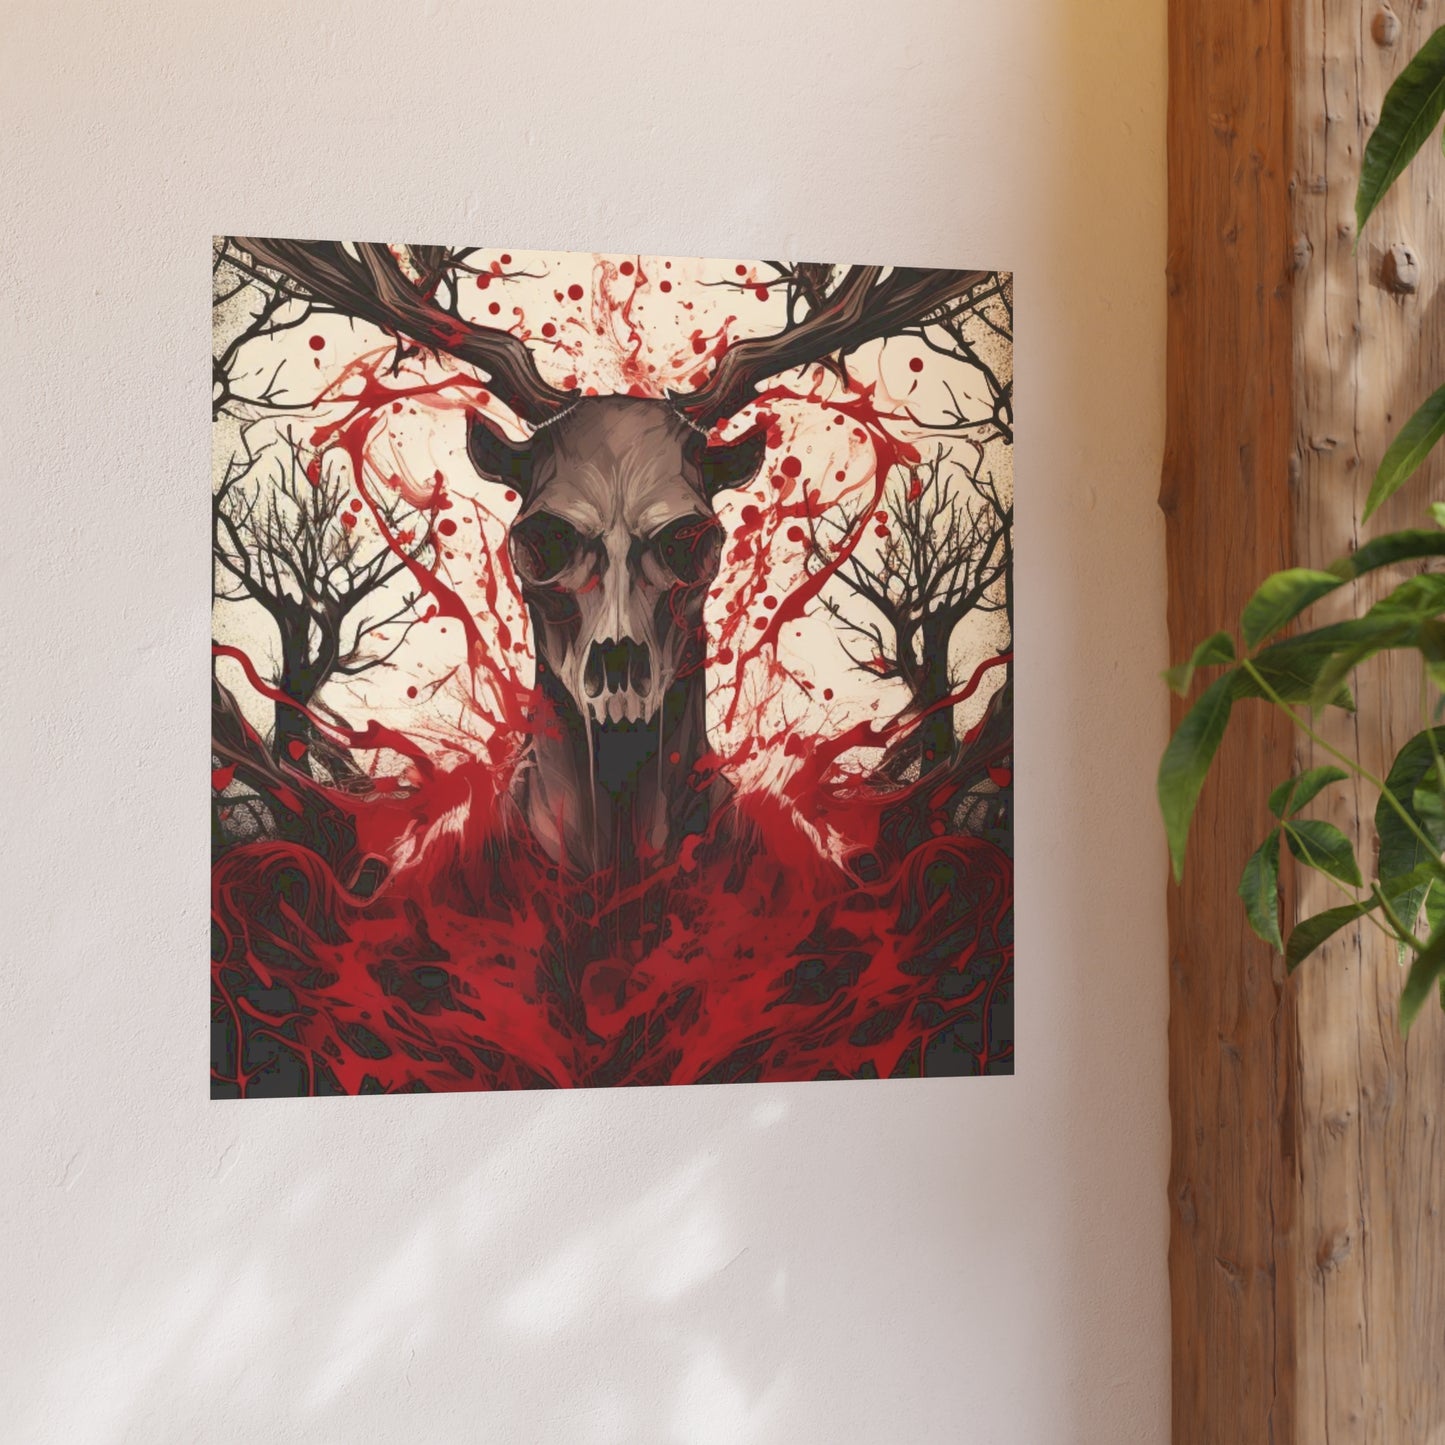 Timeless Elegance: Satin and Archival Deer Skull Poster Collection